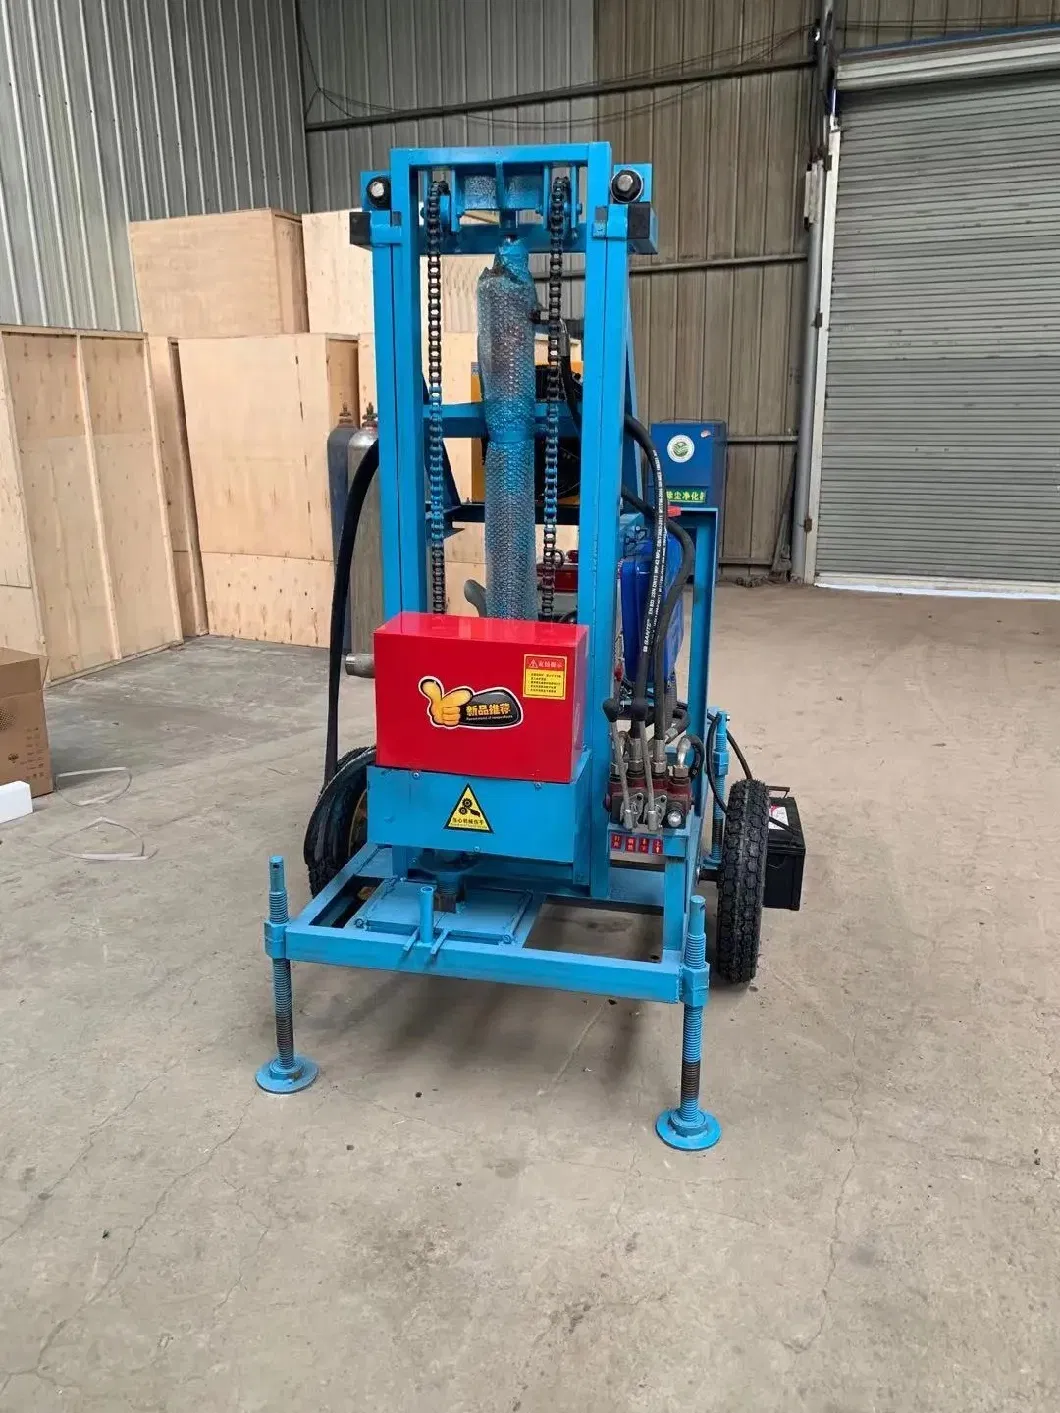 Quick Hydraulic Drilling Machine for African Farms